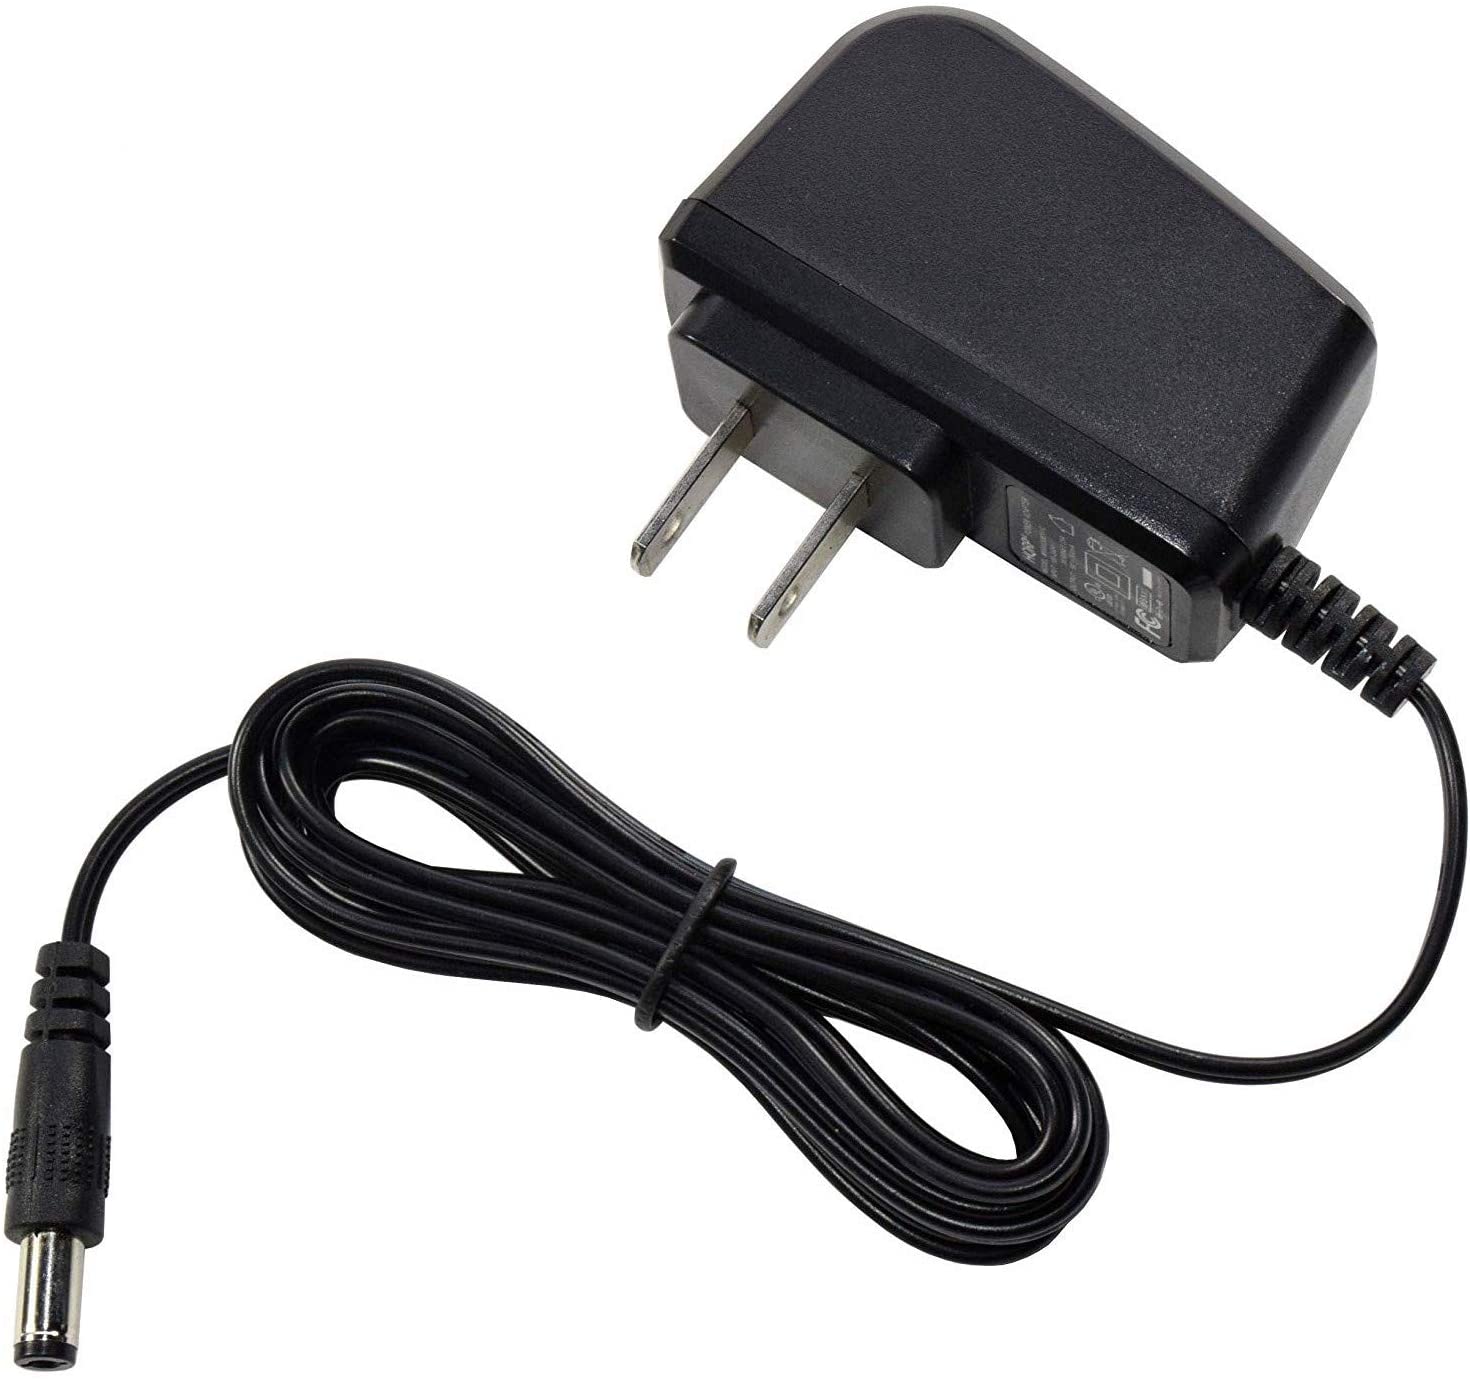 HQRP AC Adapter / Power Supply compatible with Electro-Harmonix US96DC-200BI / US9.6DC-200BI / EHX9.6DC-200 Guitar Effects pedals